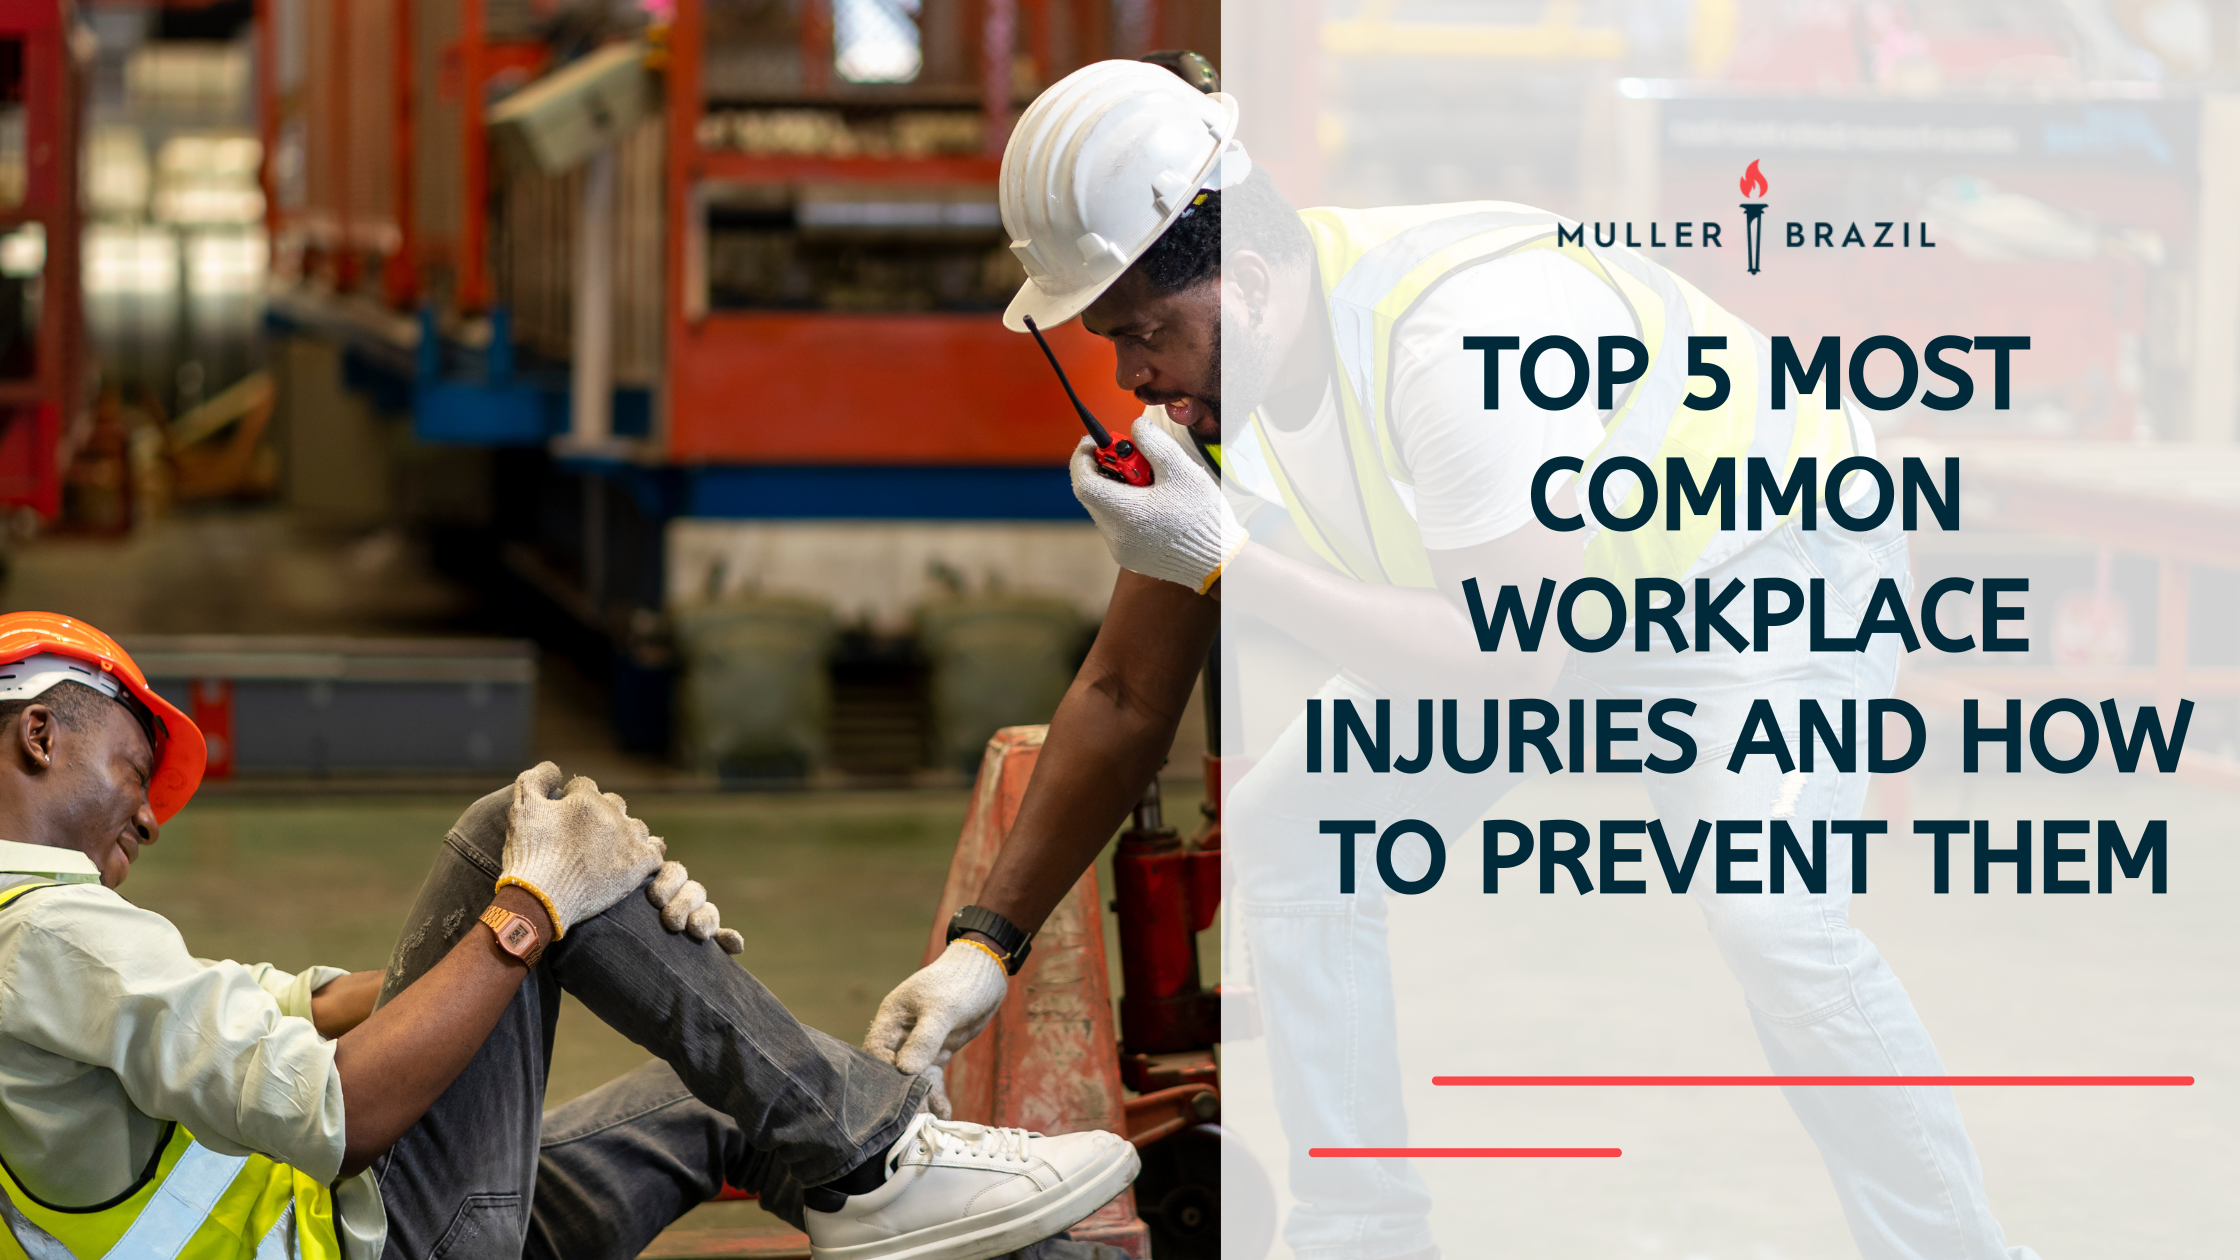 Top 5 Most Common Workplace Injuries and How to Prevent Them